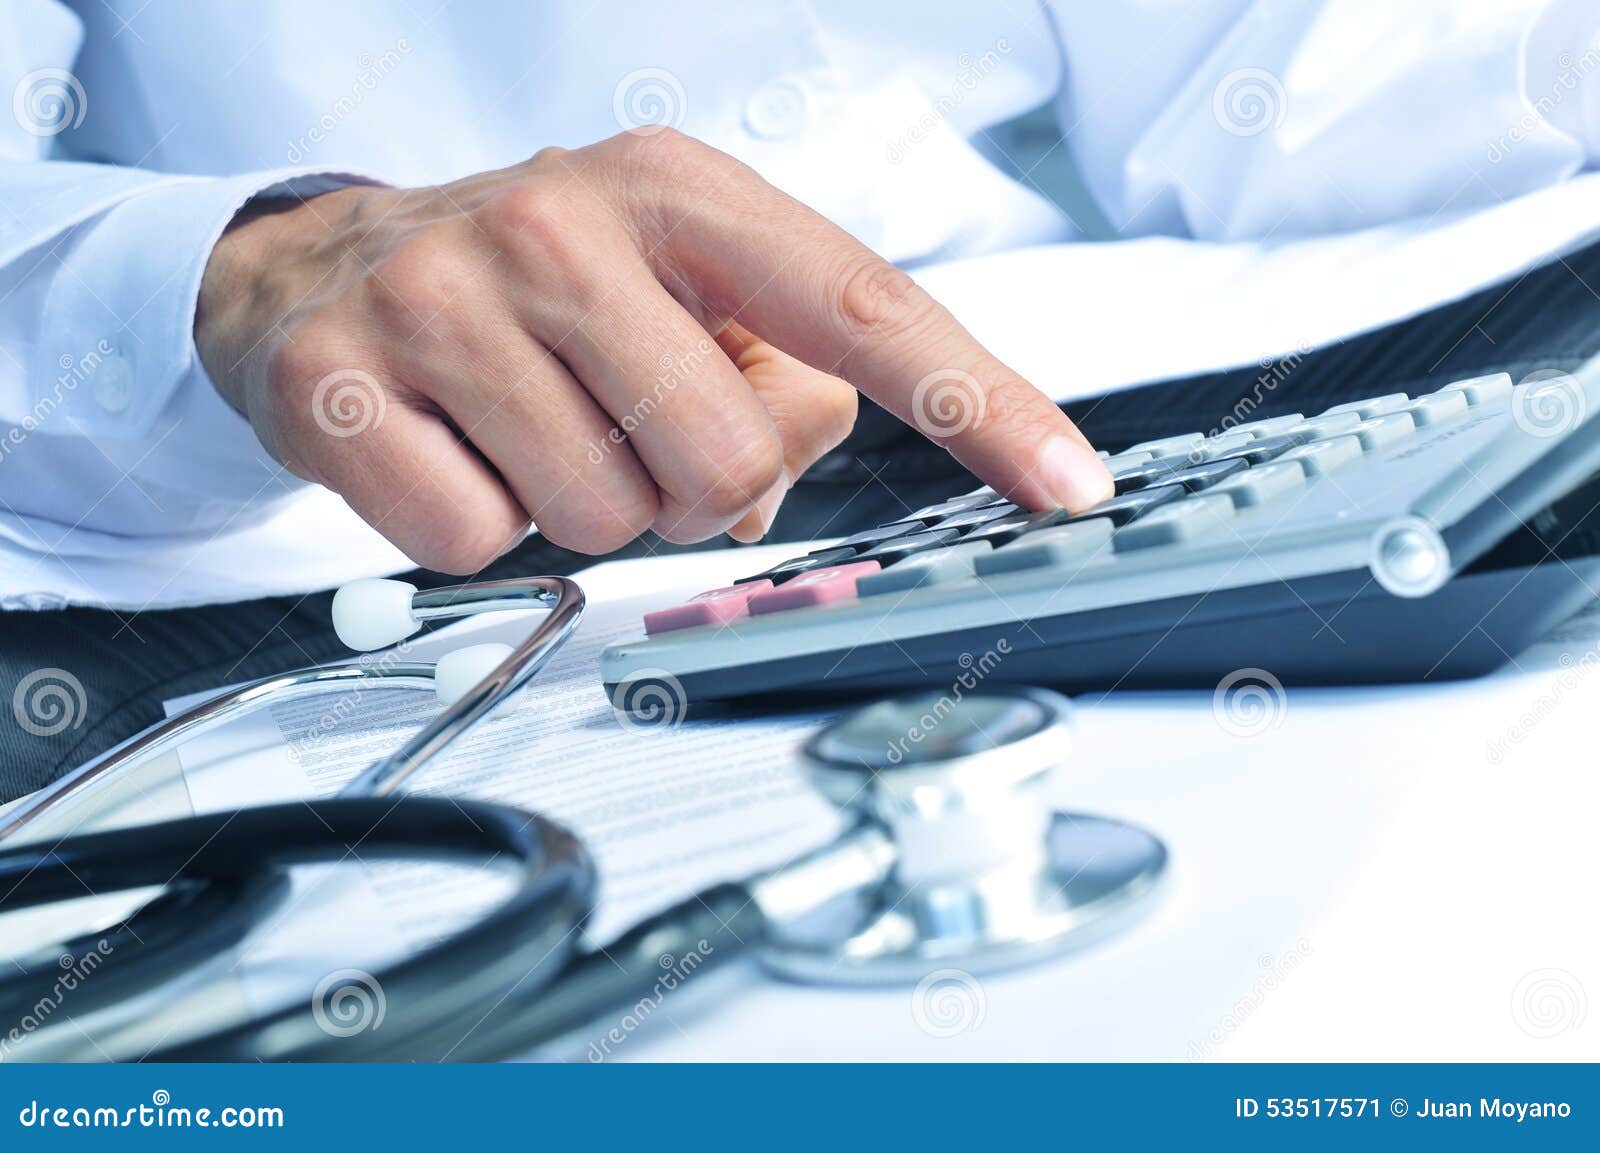 healthcare professional calculating on an electronic calculator